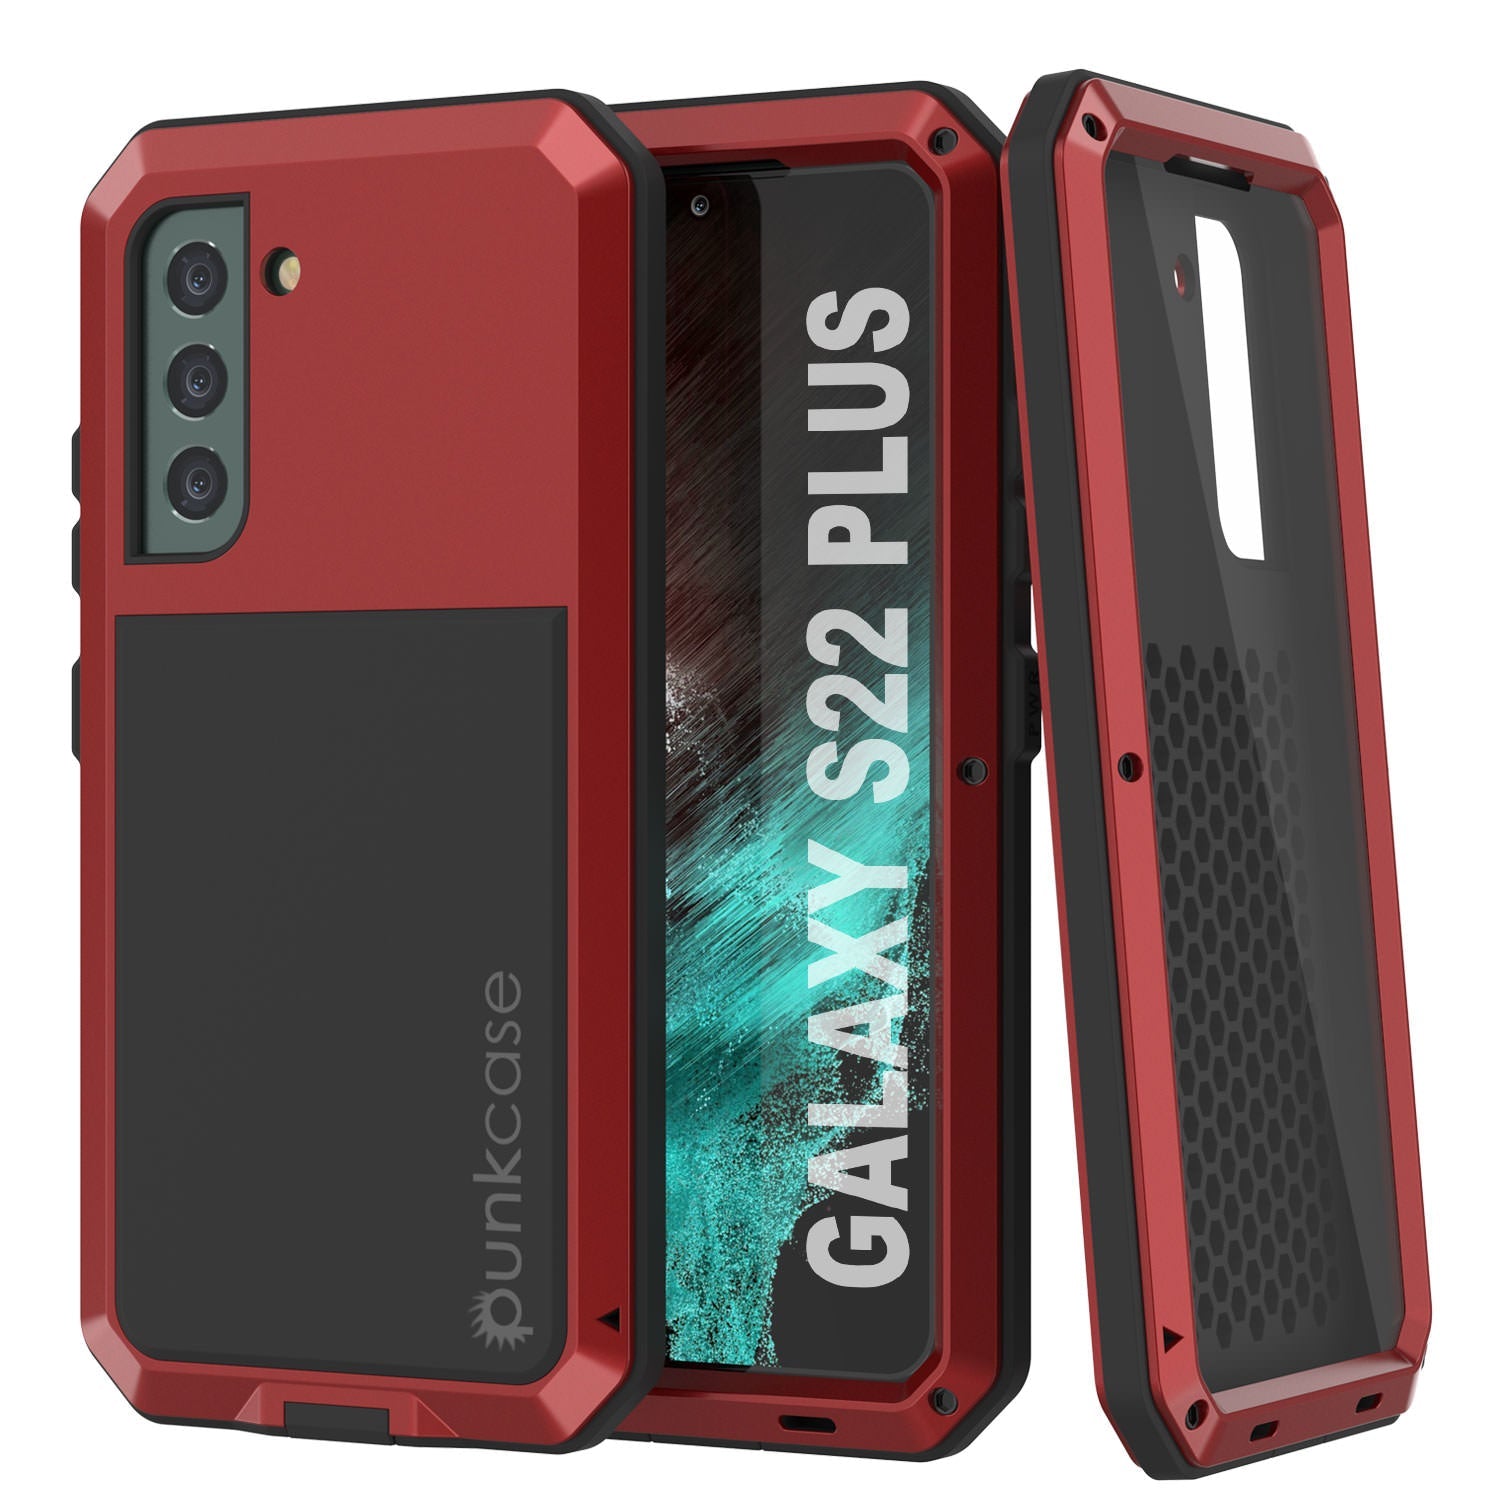 Galaxy S22+ Plus Metal Case, Heavy Duty Military Grade Rugged Armor Cover [Red]